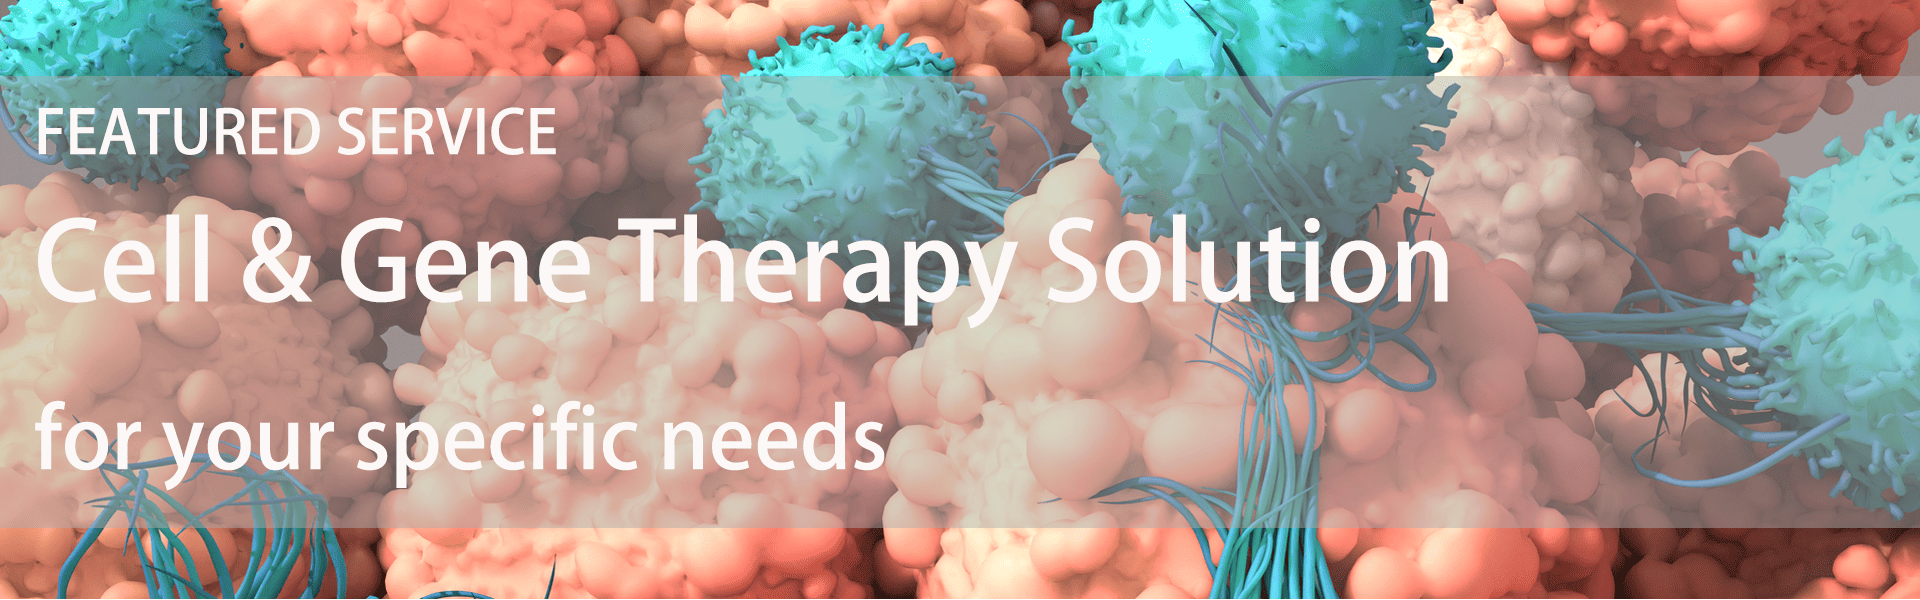 Cell & Gene Therapy Solution